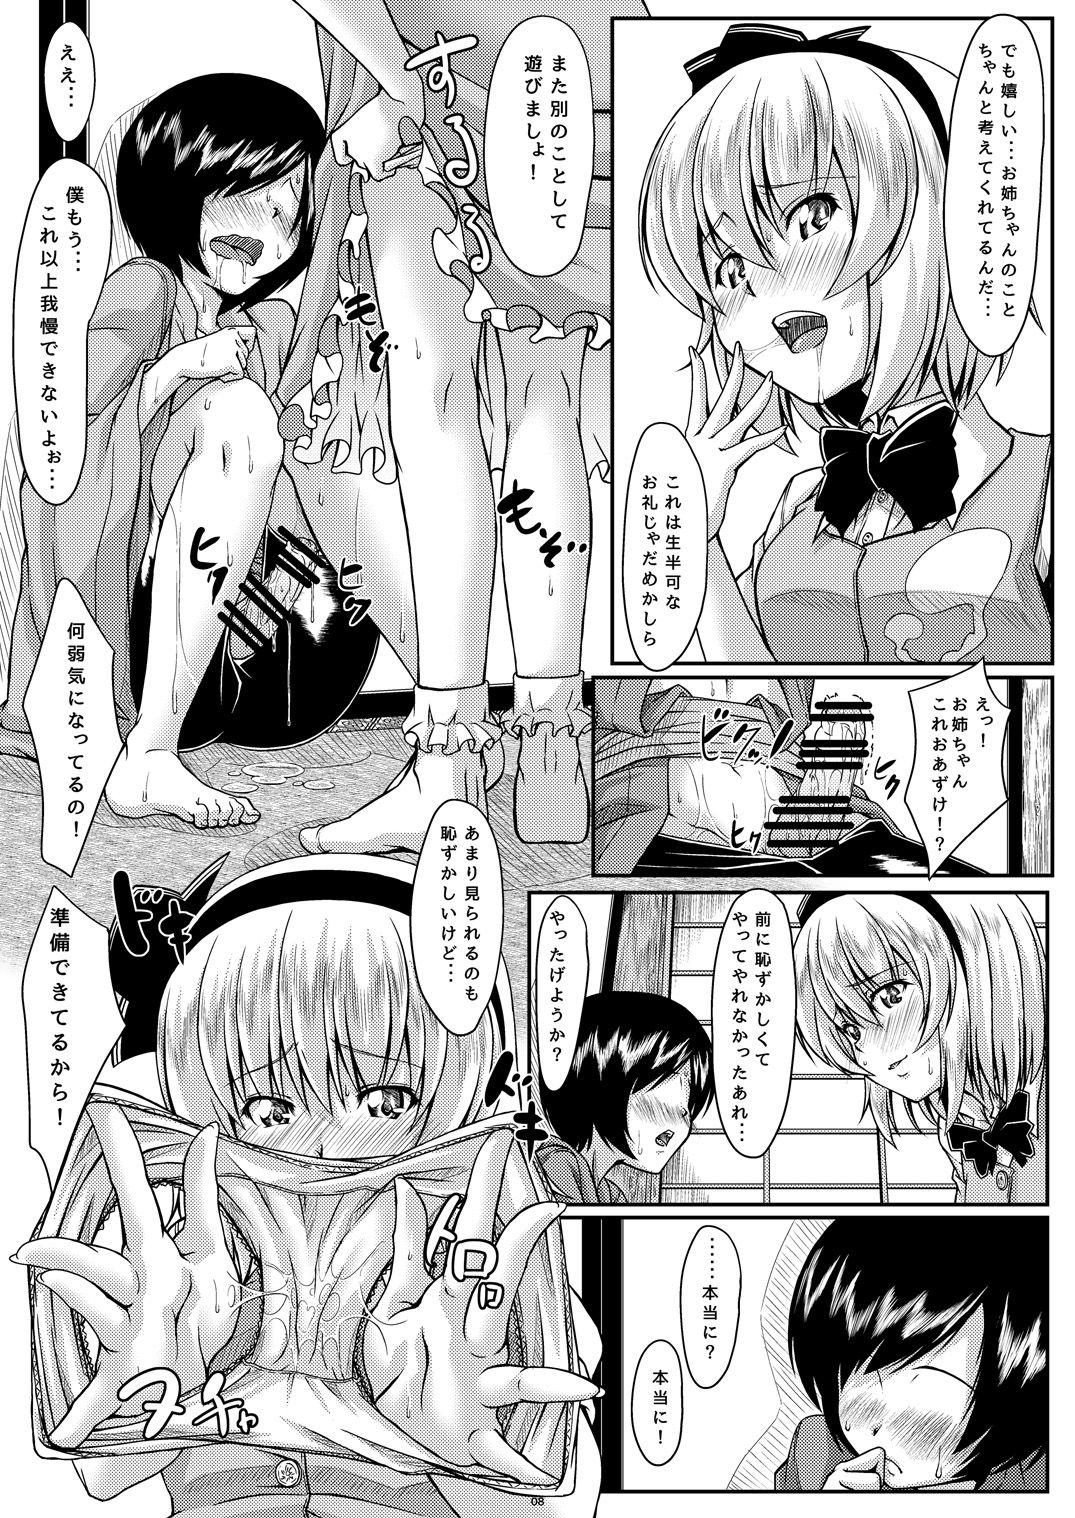 Oldvsyoung Onee-chan to no Myon na Kankei - Touhou project Con - Page 7